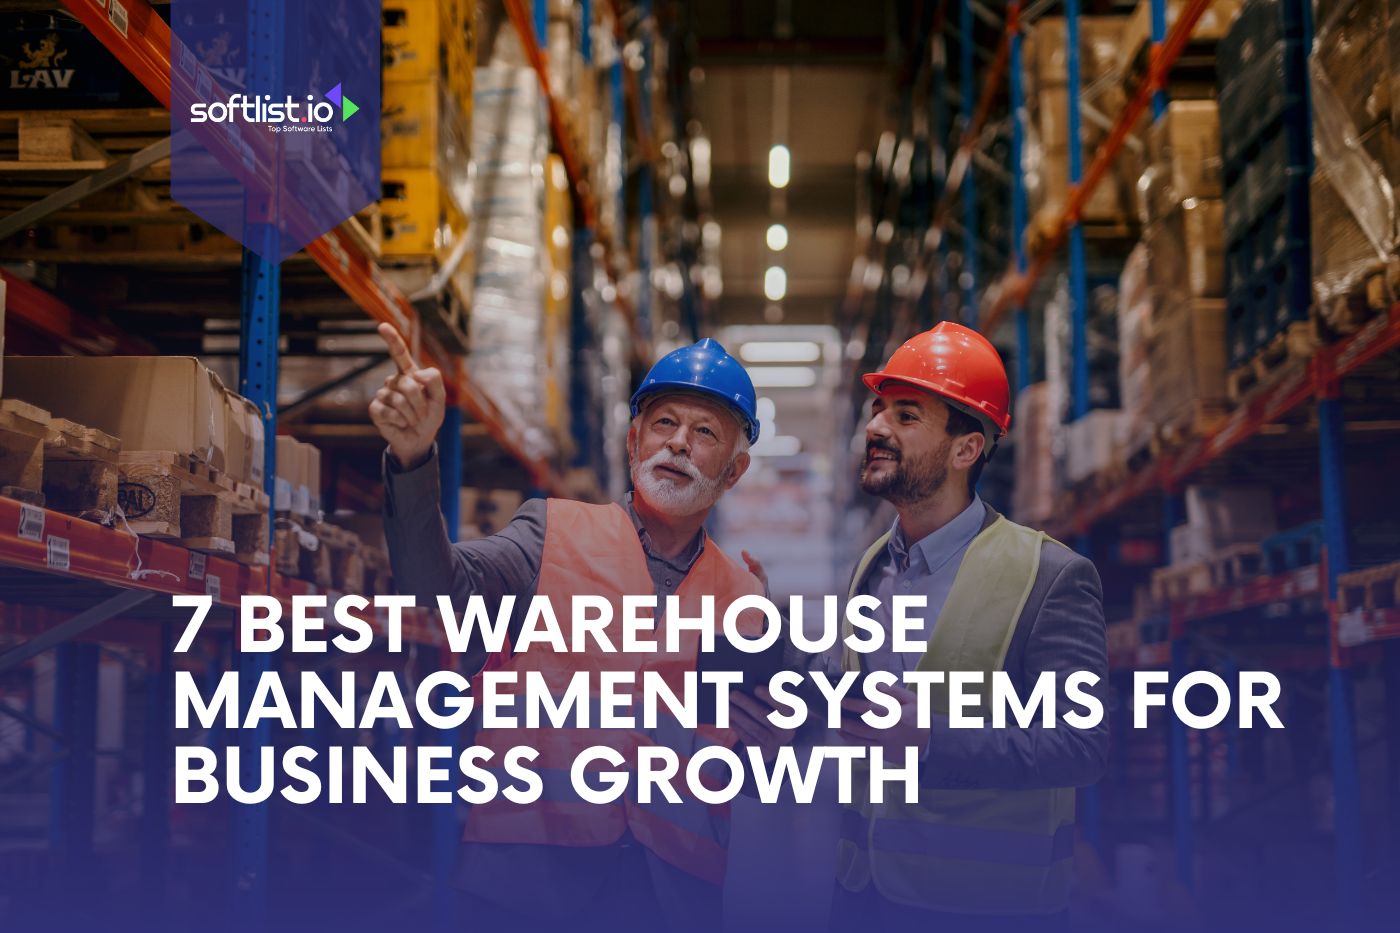 7 Best Warehouse Management Systems for Business Growth